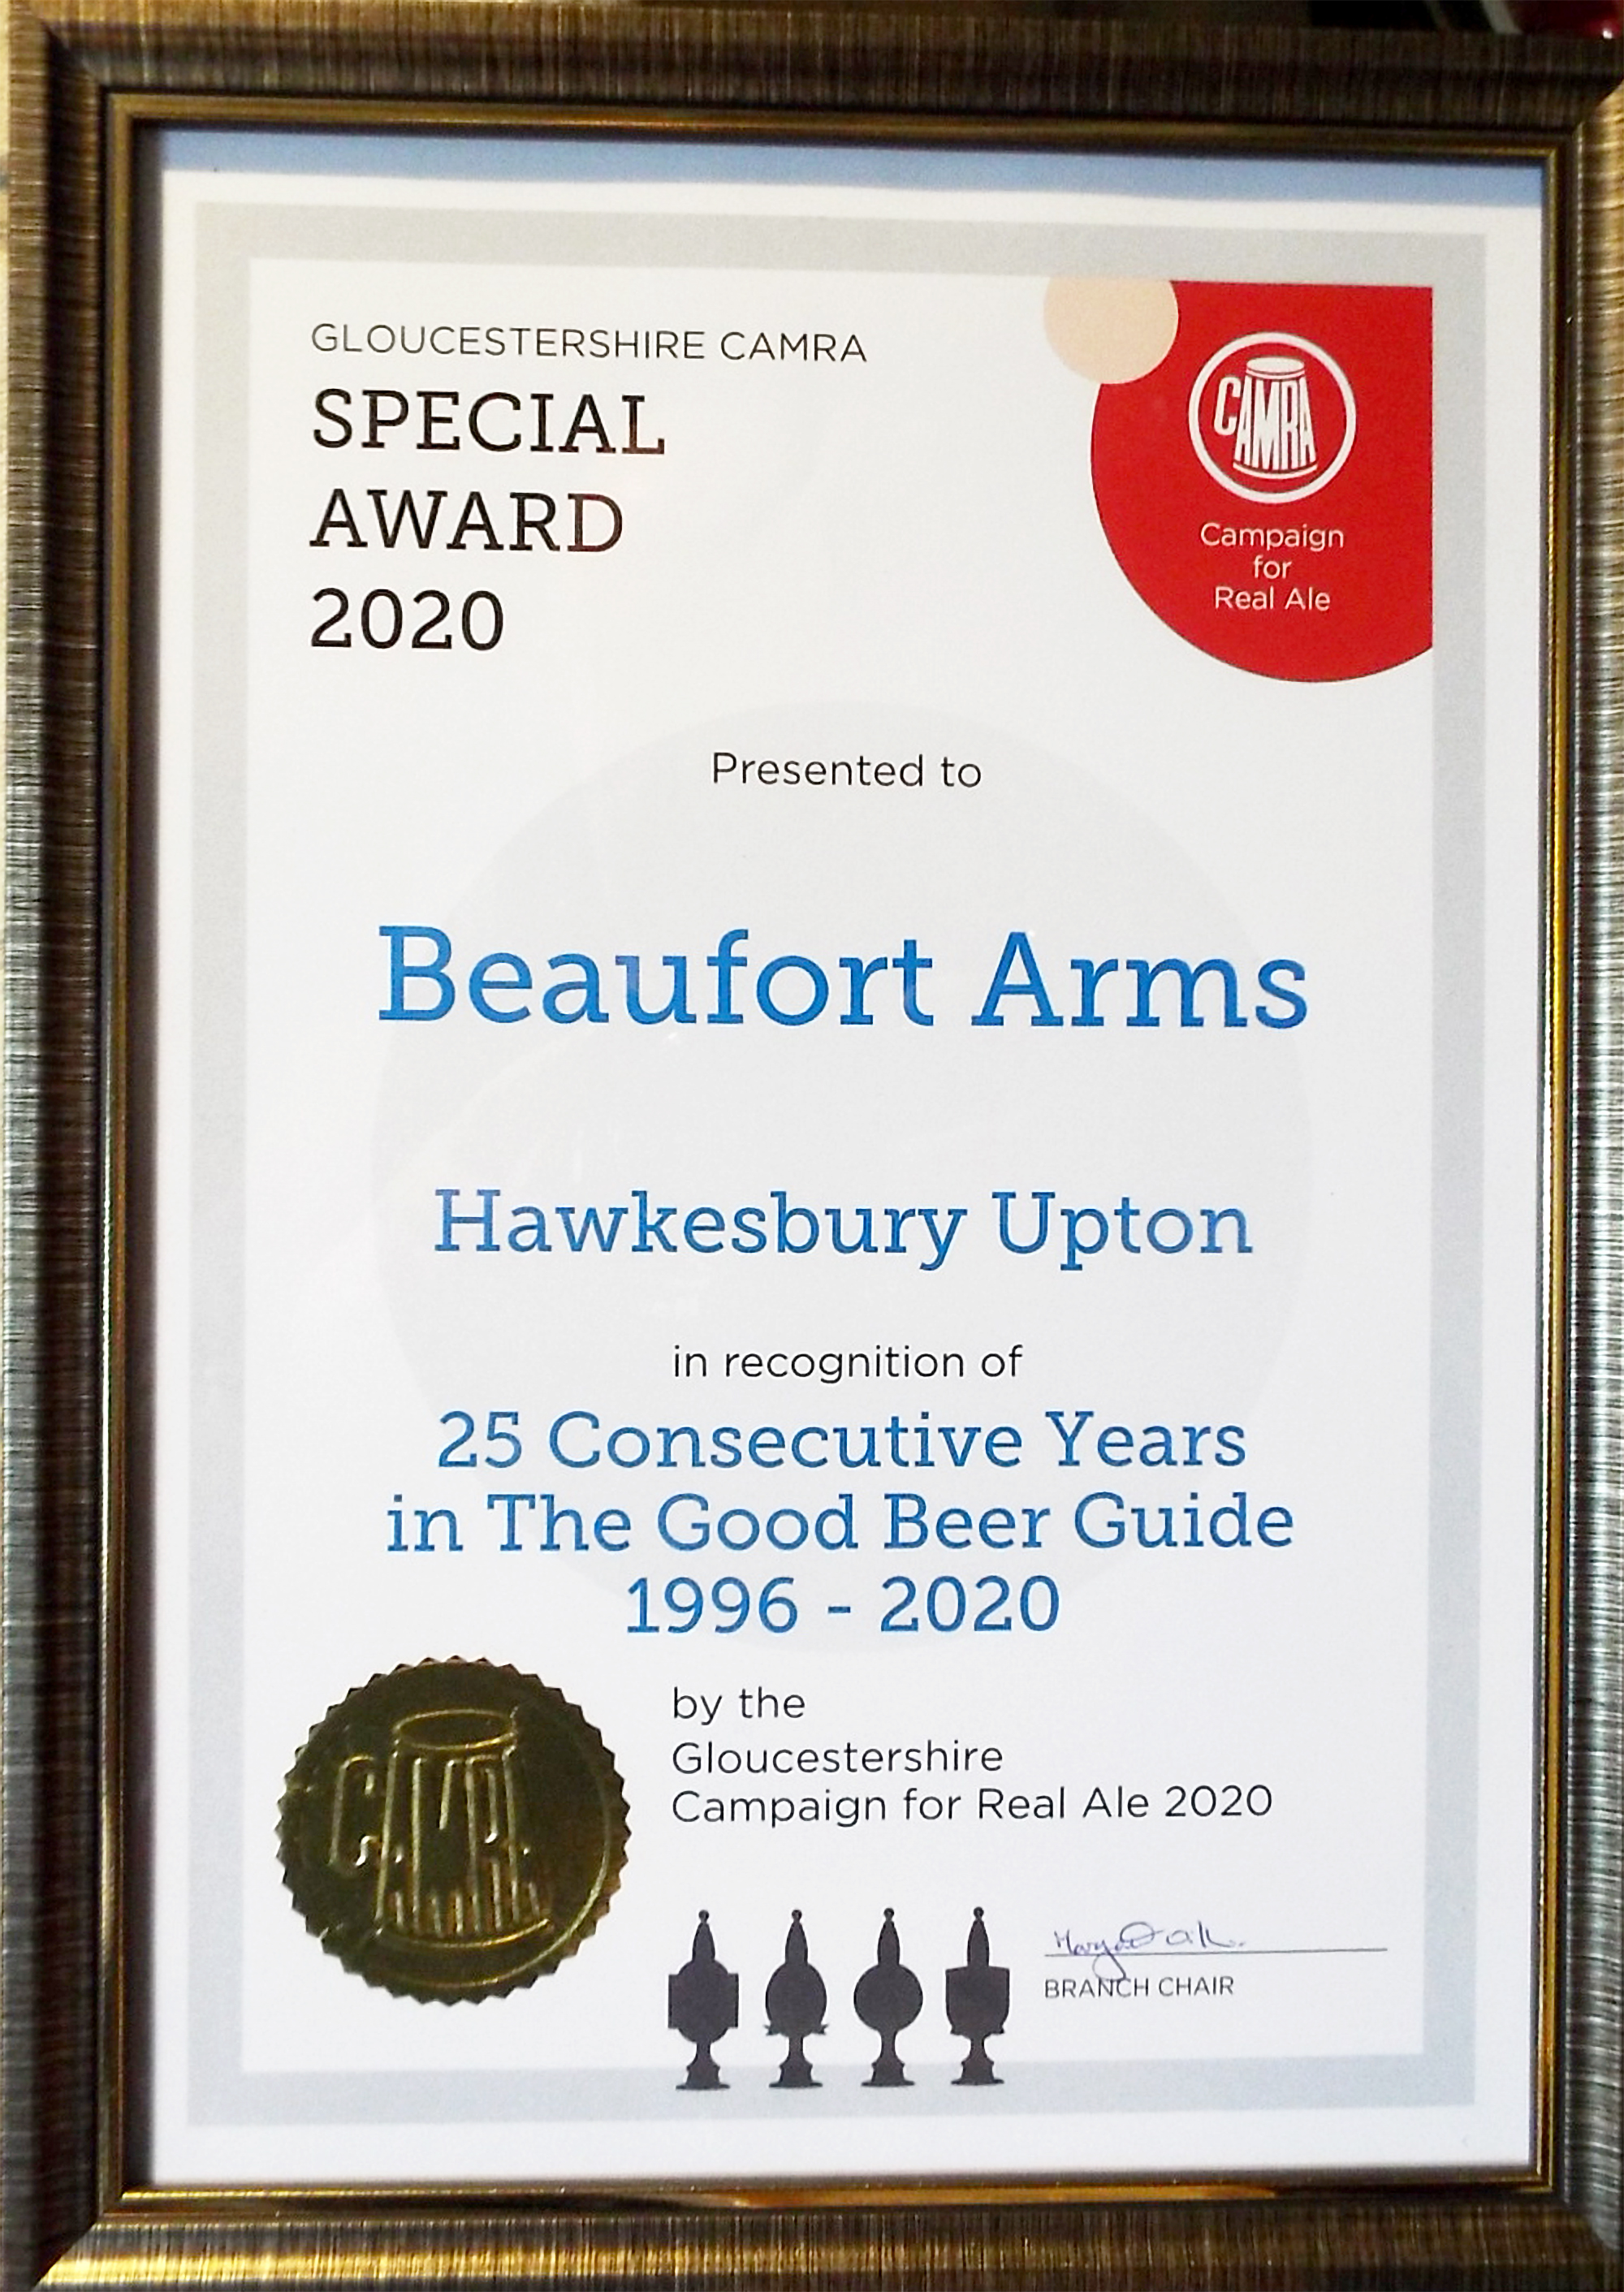 Beaufort Arms - Certificate in recognition of 25 consecutive years in the Good Beer Guide